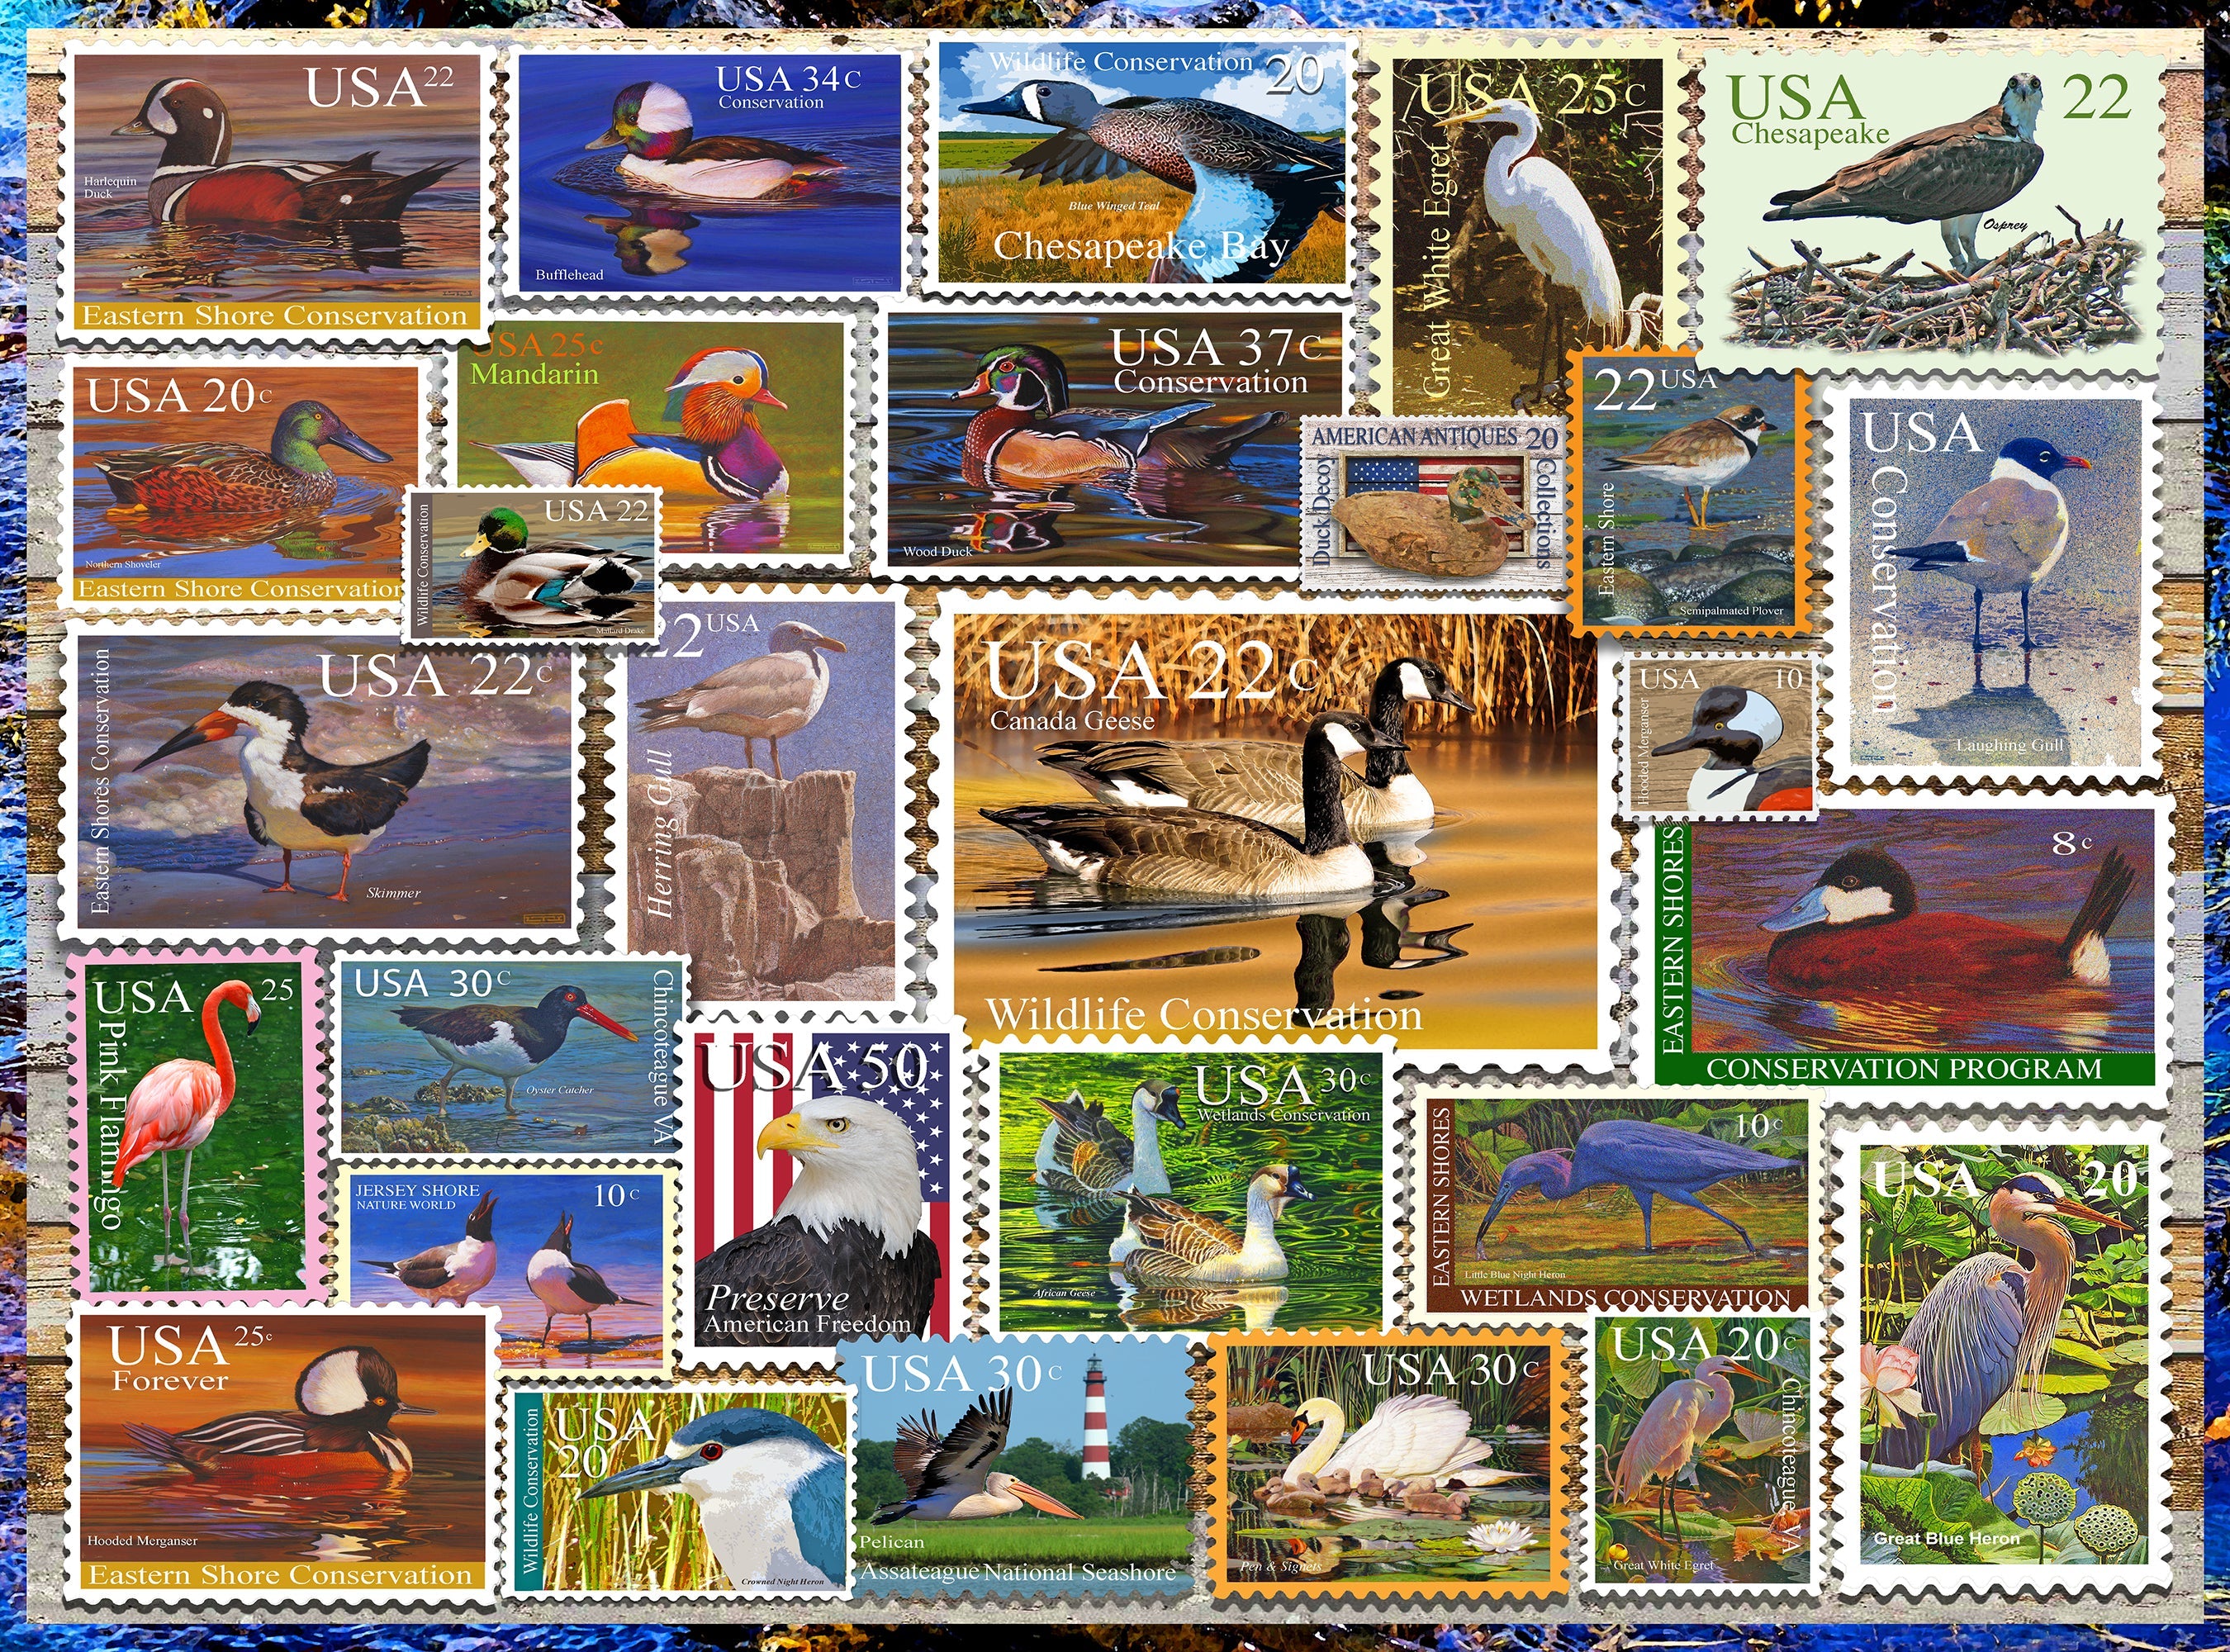 Birds of Our Shores Stamps 1000 Piece - Jigsaw Puzzle